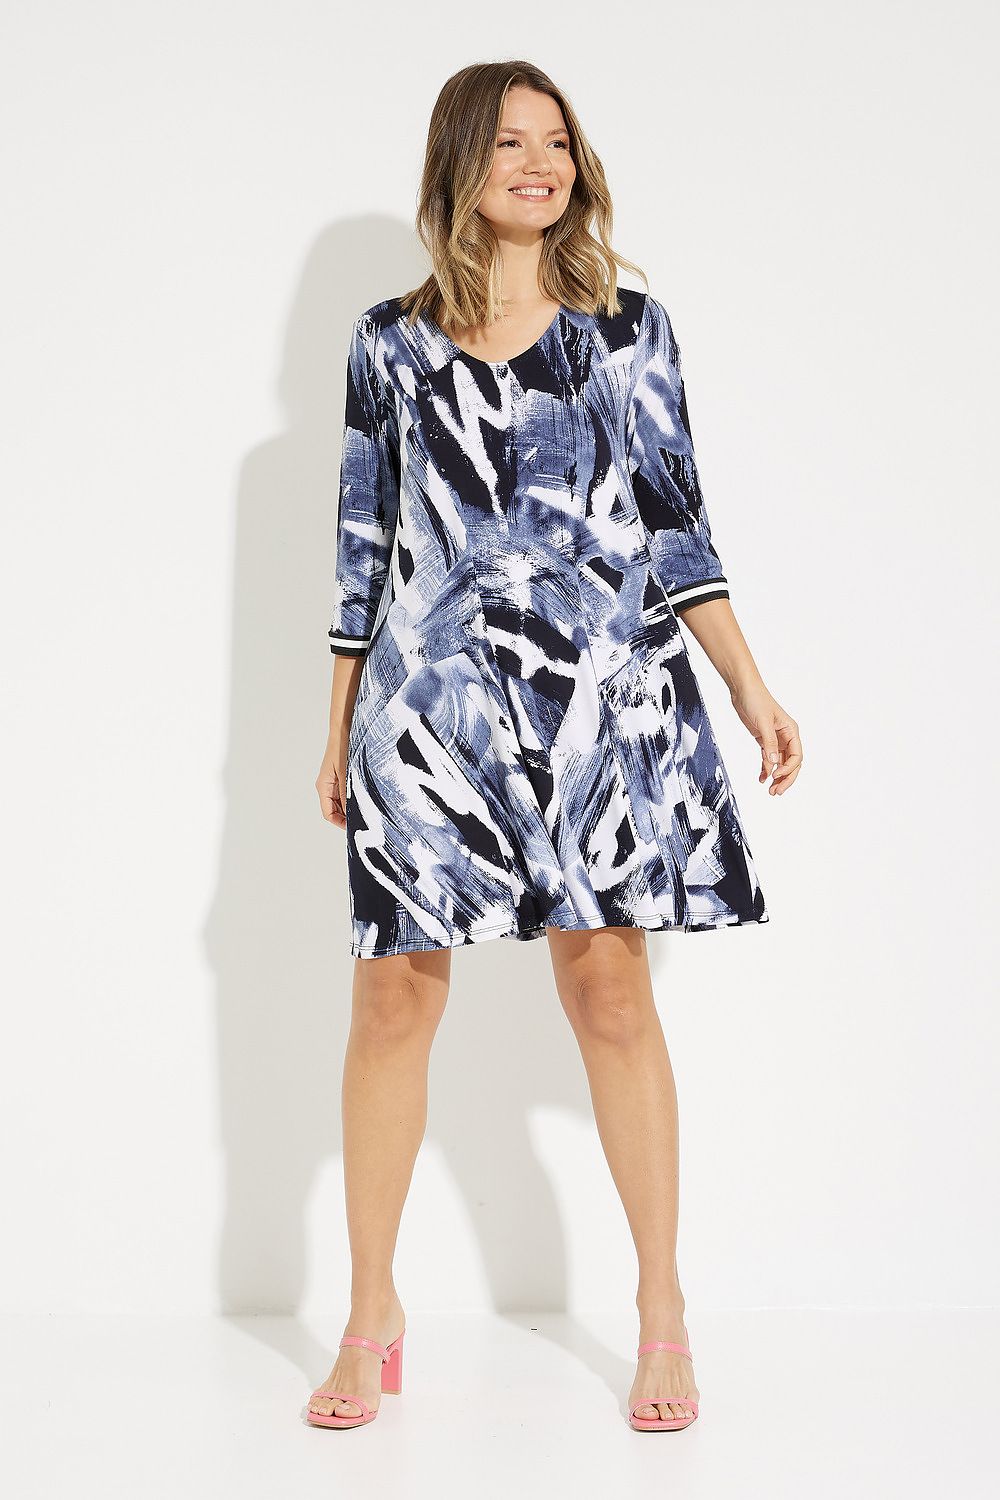 Abstract Print Shift Dress Style 231112. Midnight Blue/multi